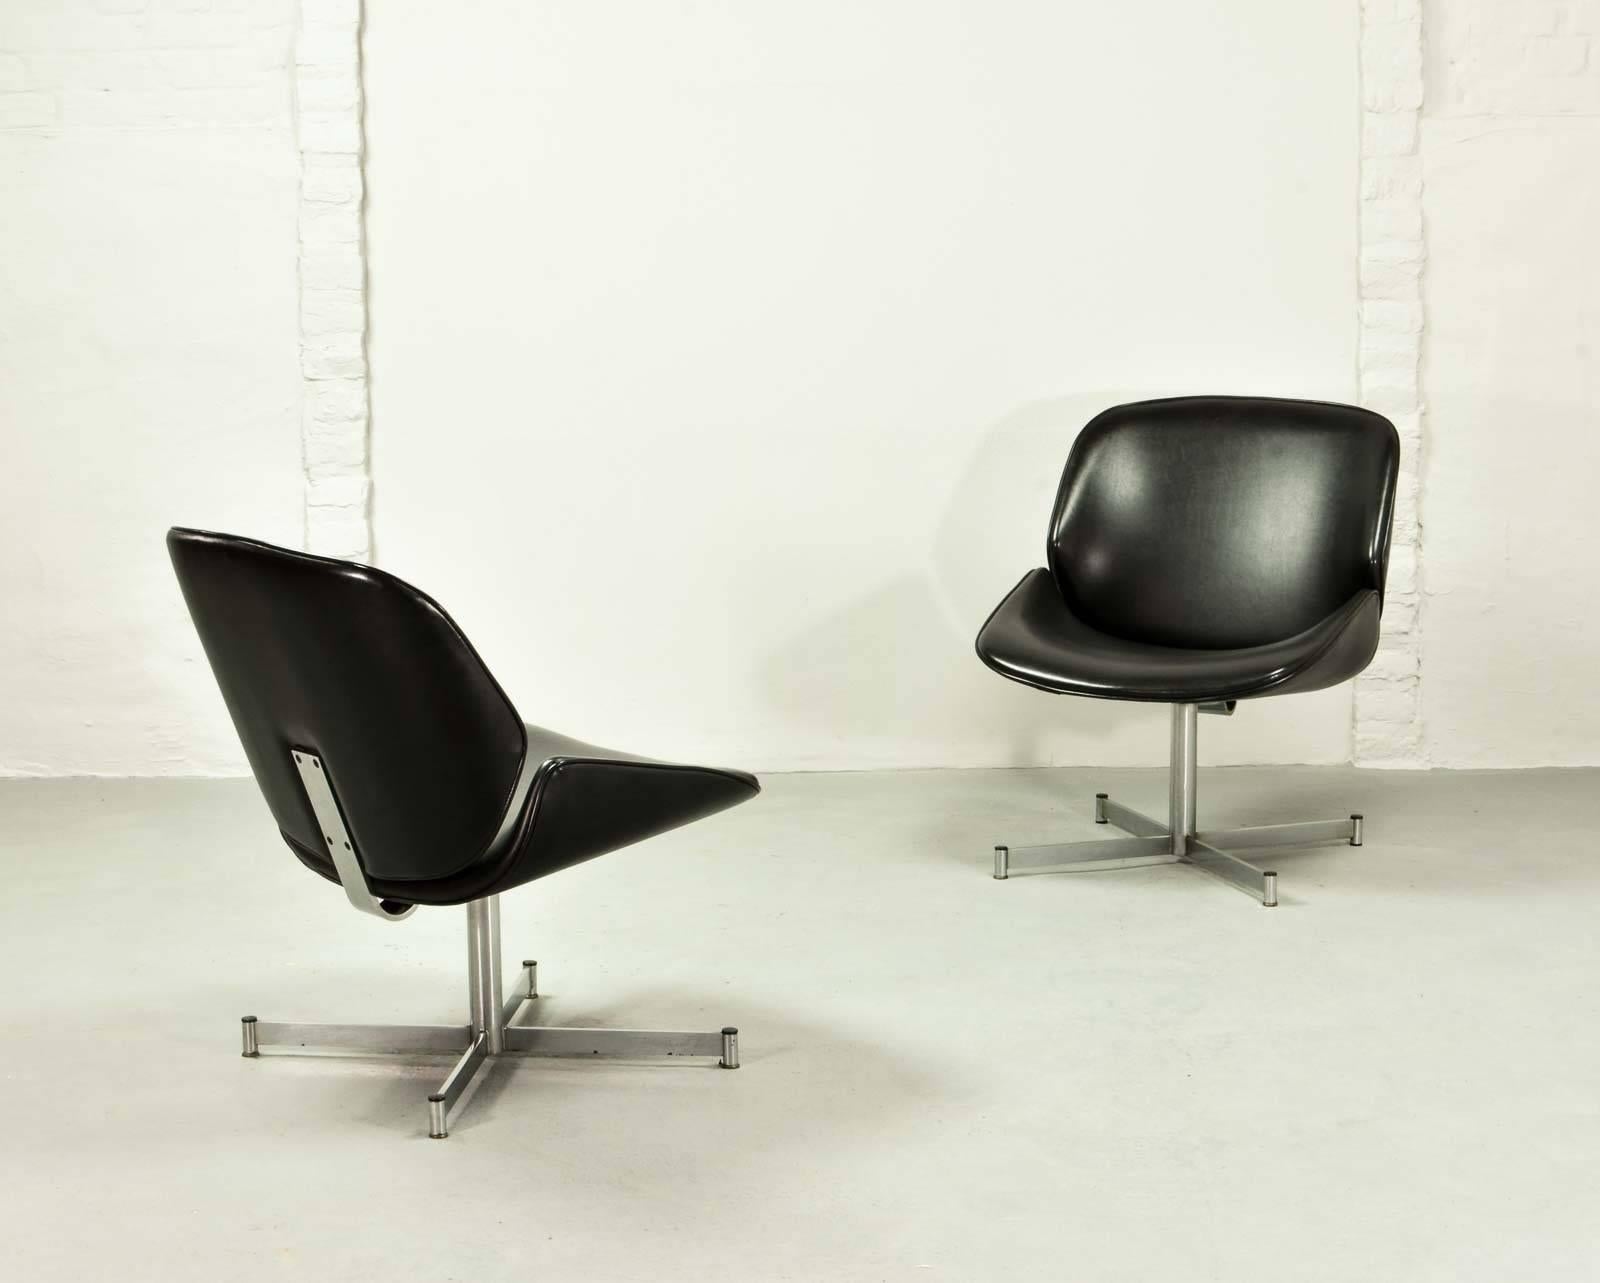 Set of two comfortable side / cocktail chairs designed by Geoffrey Harcourt and produced for Artifort / Exquis in the 1960s. The design of these elegant chairs is inspired on and in style of the well-known 'Orange Slice' chair of Pierre Paulin. The